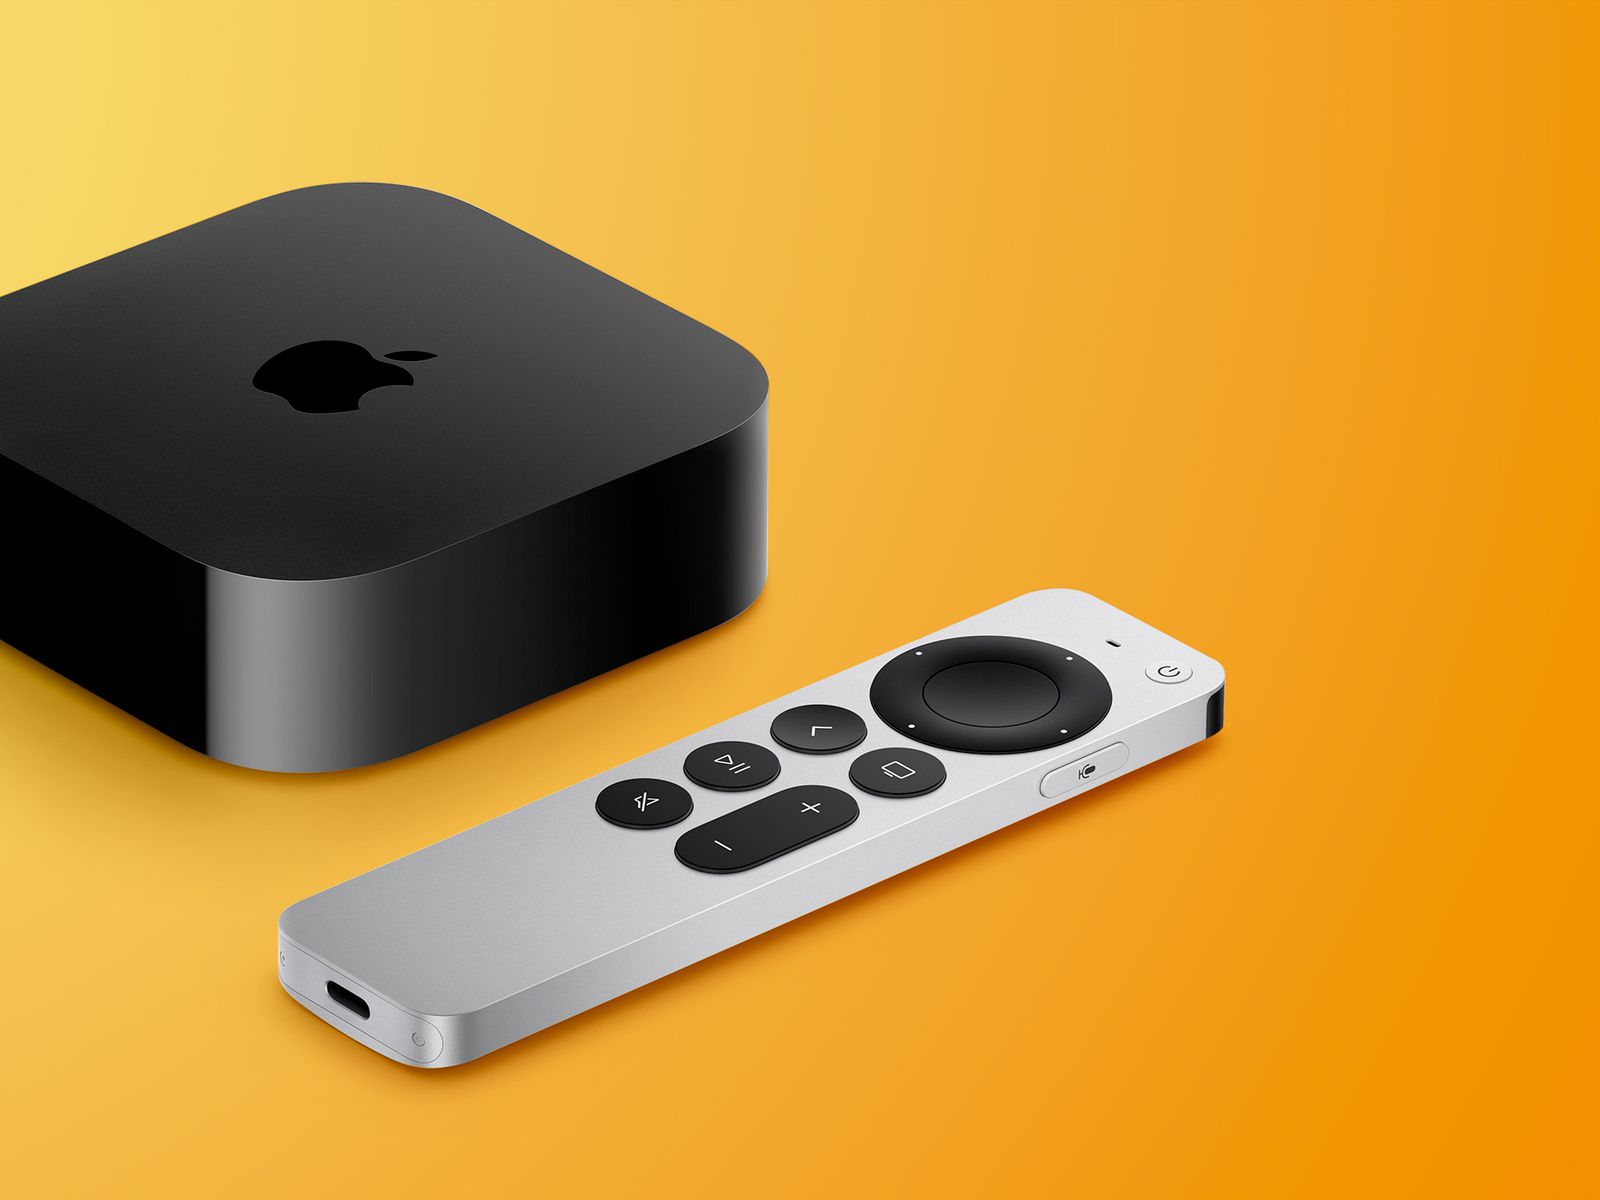 bag Atlantic smog Apple TV: Should You Buy? Features, Reviews, and More